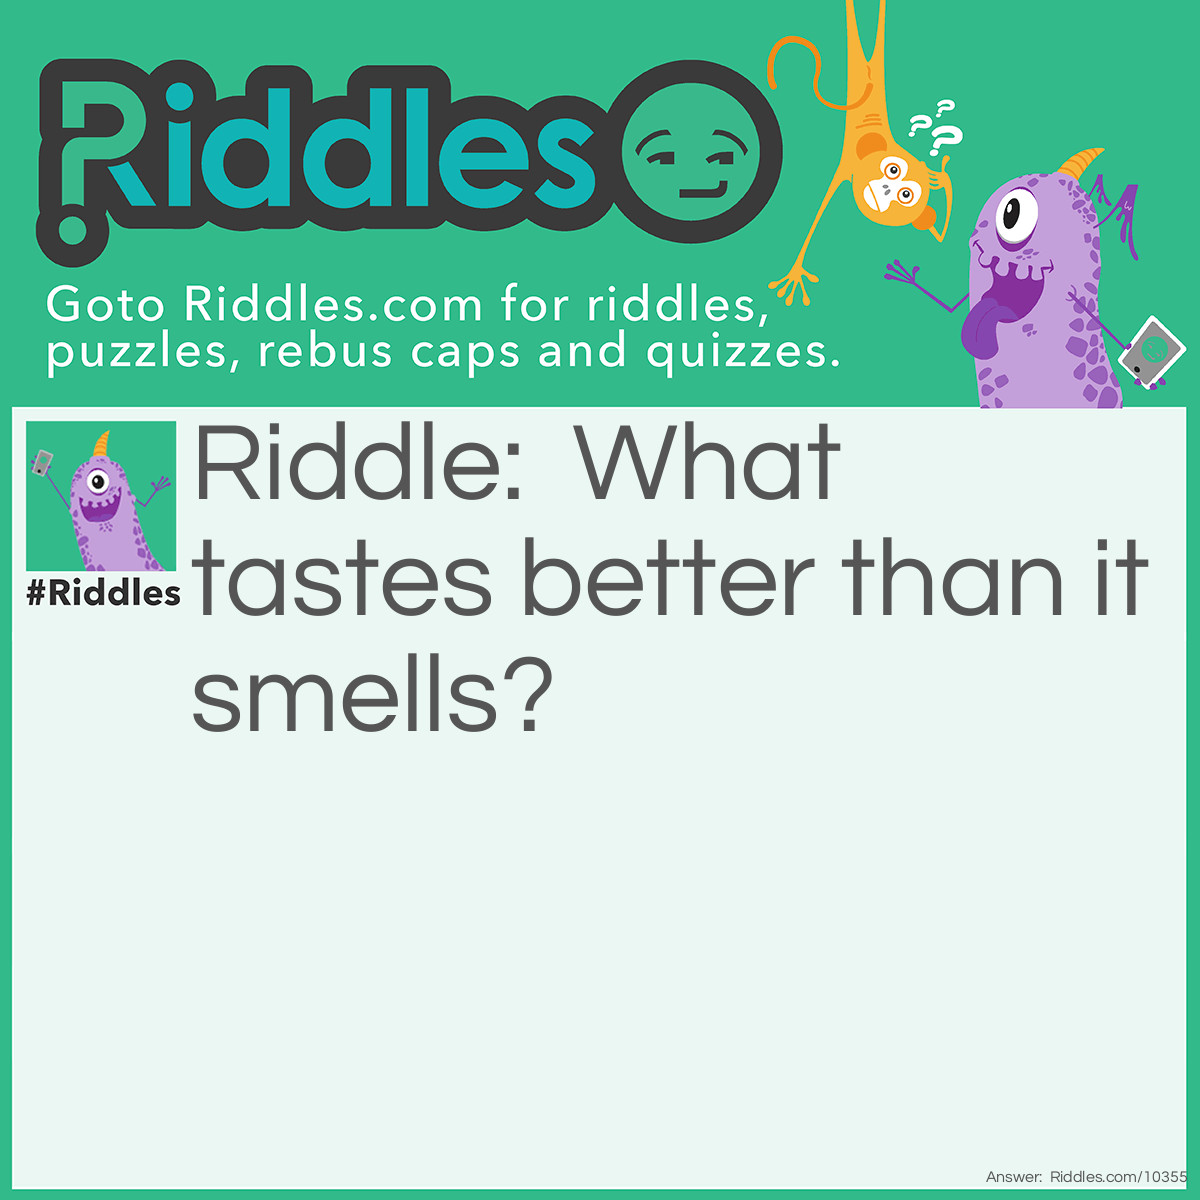 Riddle: What tastes better than it smells? Answer: Your tongue.